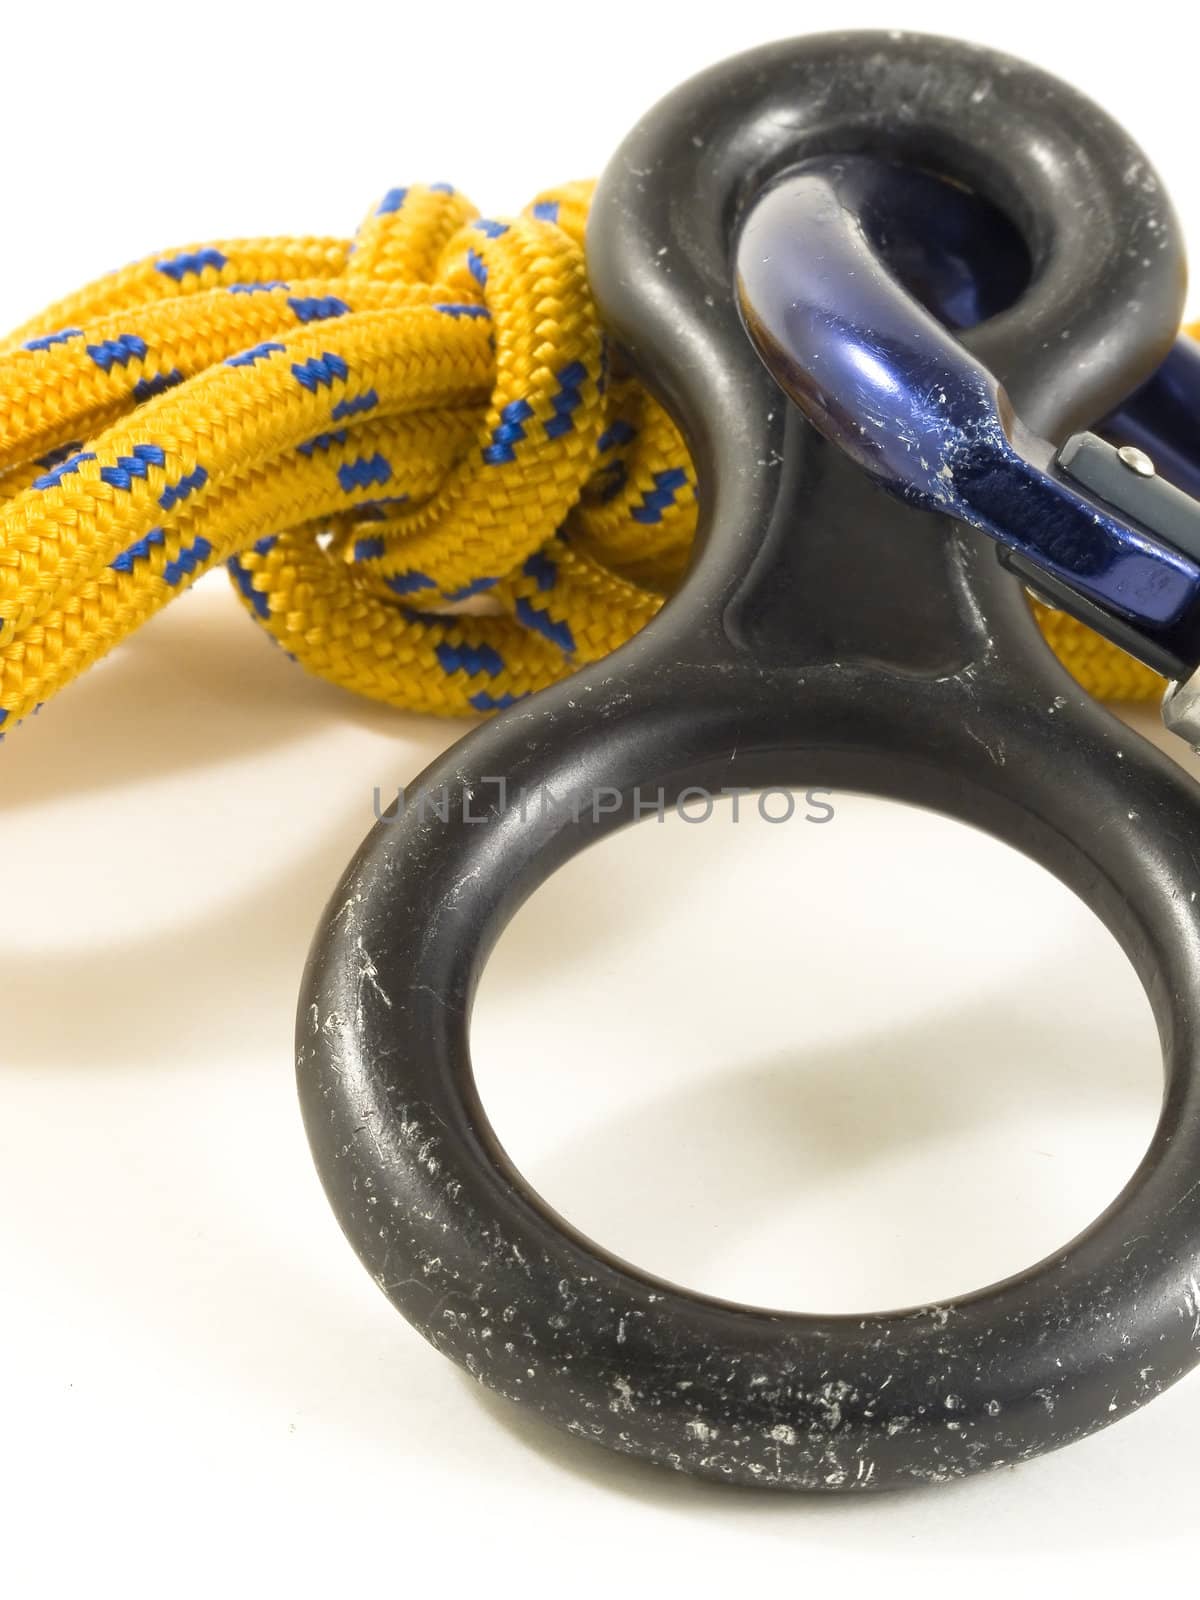 carabiner and rope with DOF by PauloResende